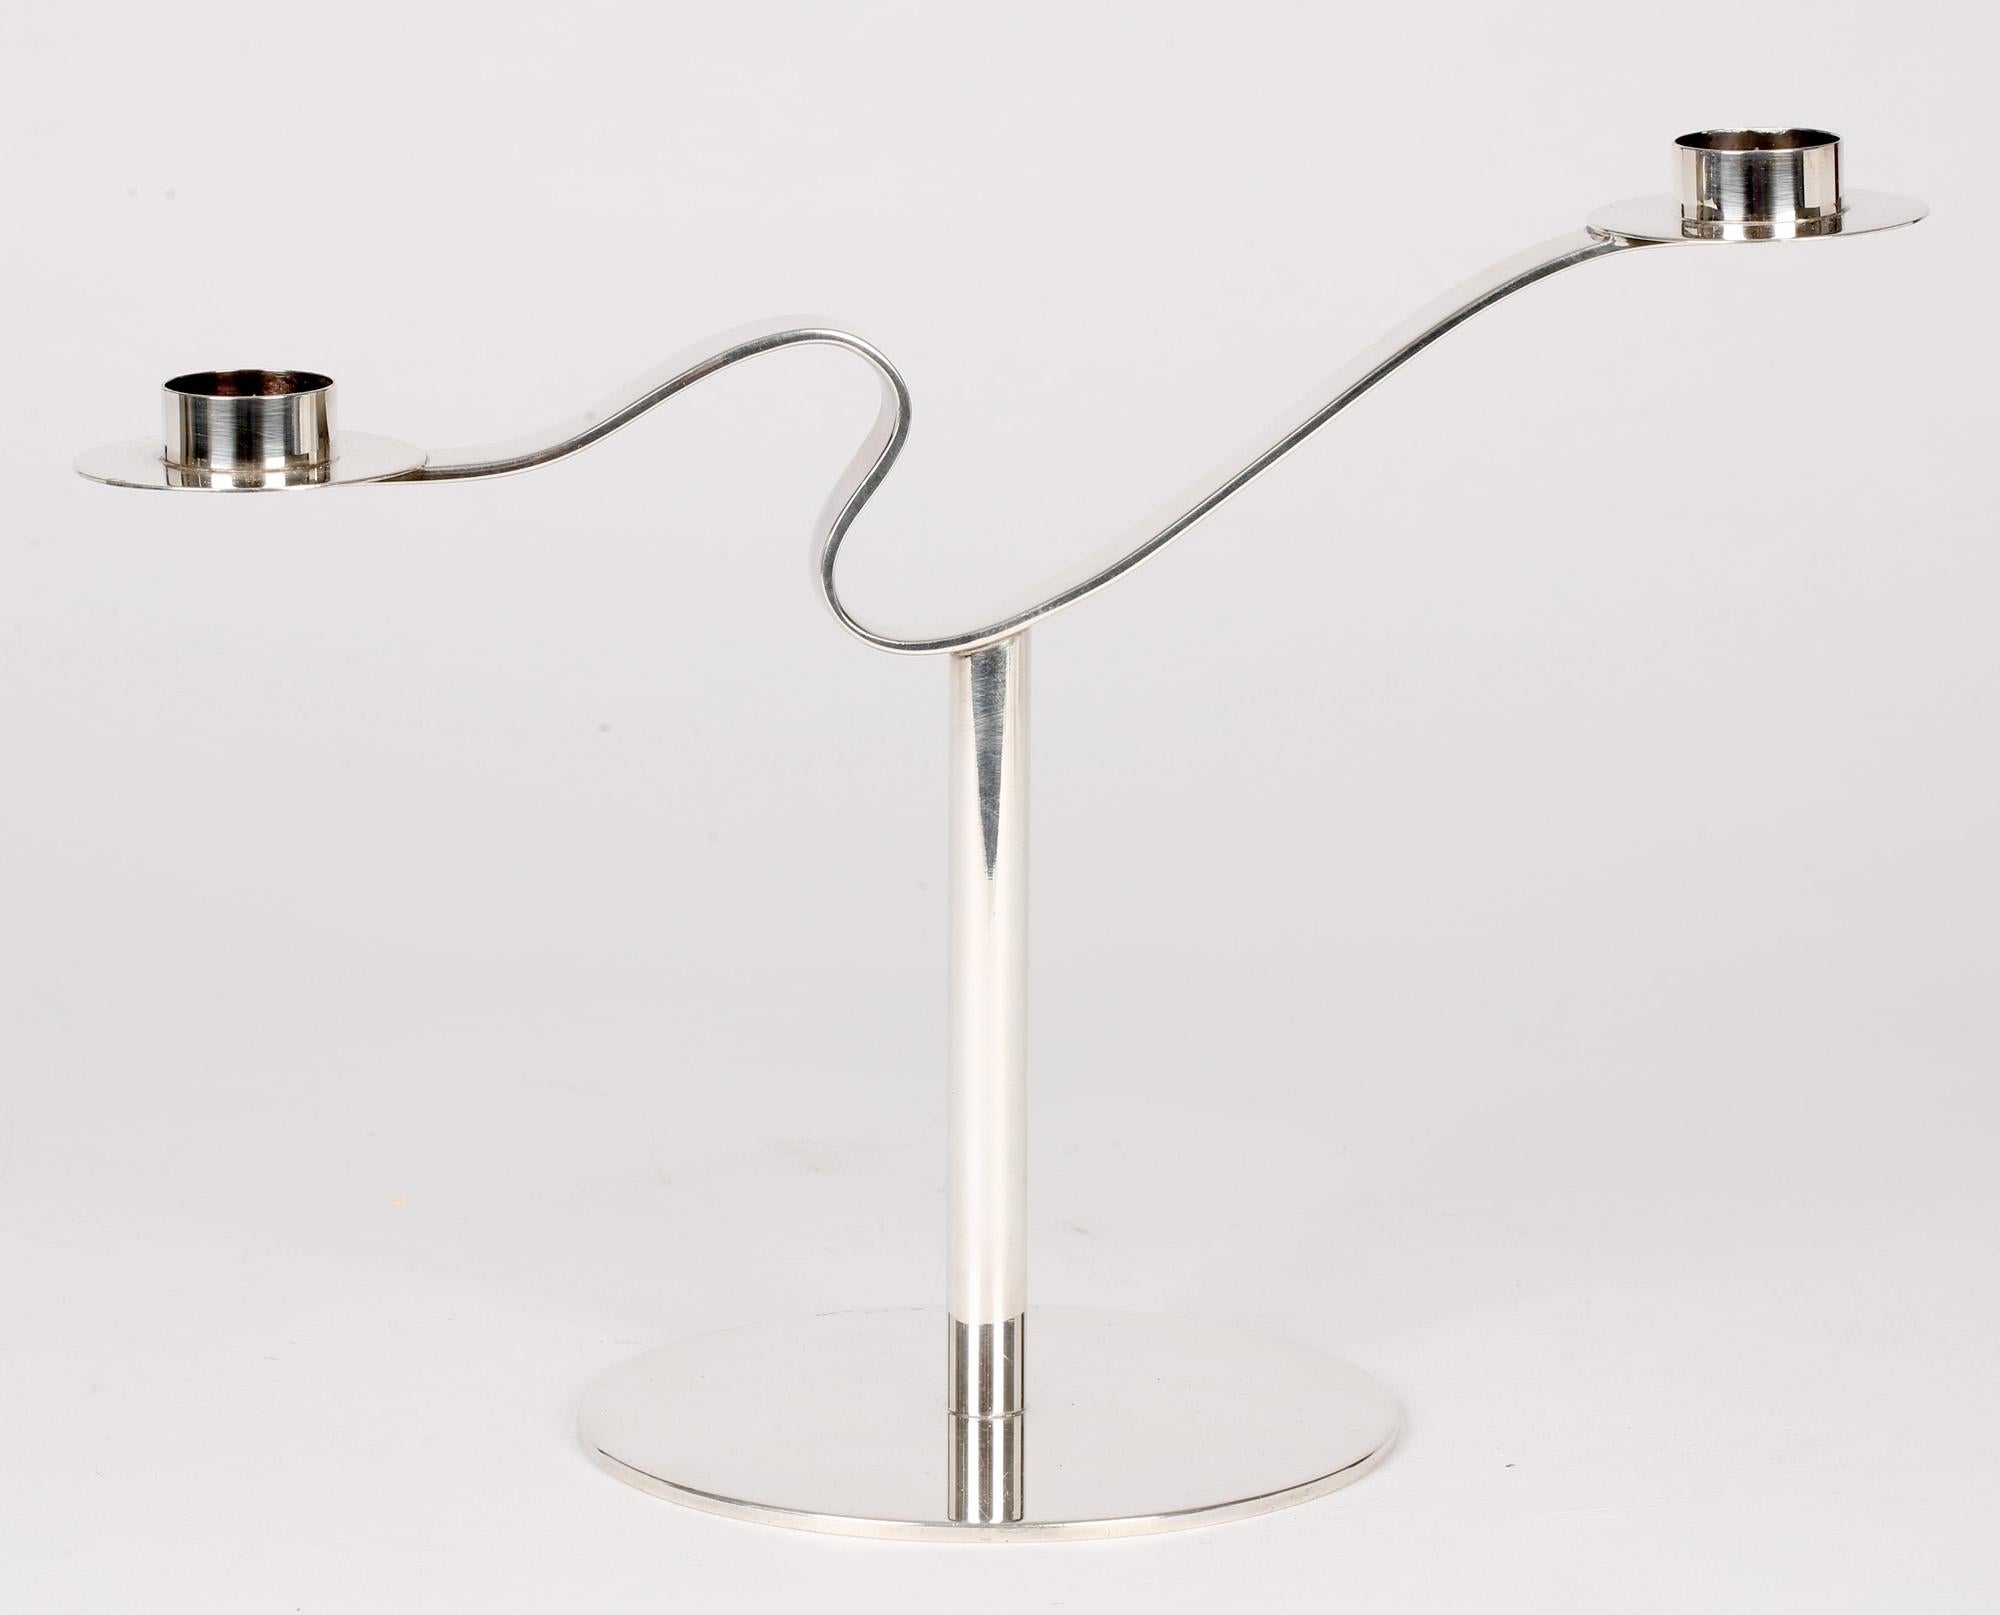 Pampaloni of Florence Italian Modernist Silver Candlestick In Good Condition For Sale In Bishop's Stortford, Hertfordshire